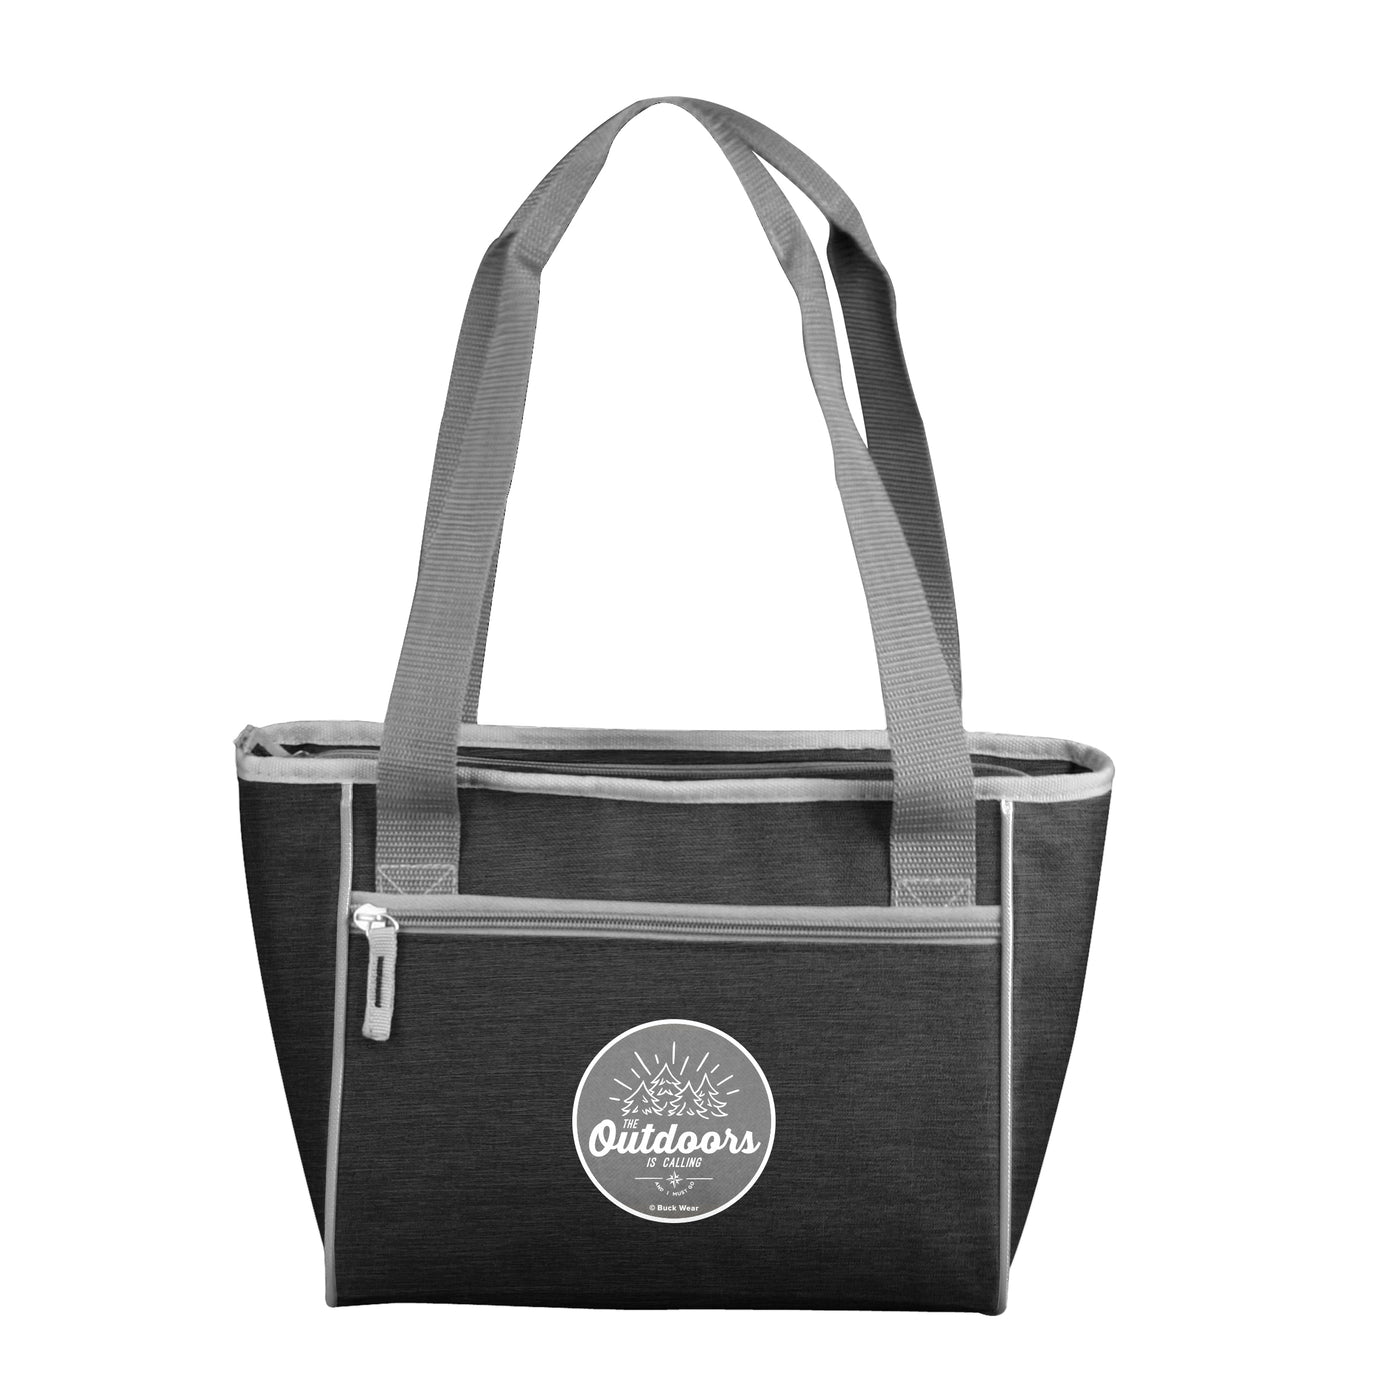 Outdoors Is Calling 16 Can Cooler Tote